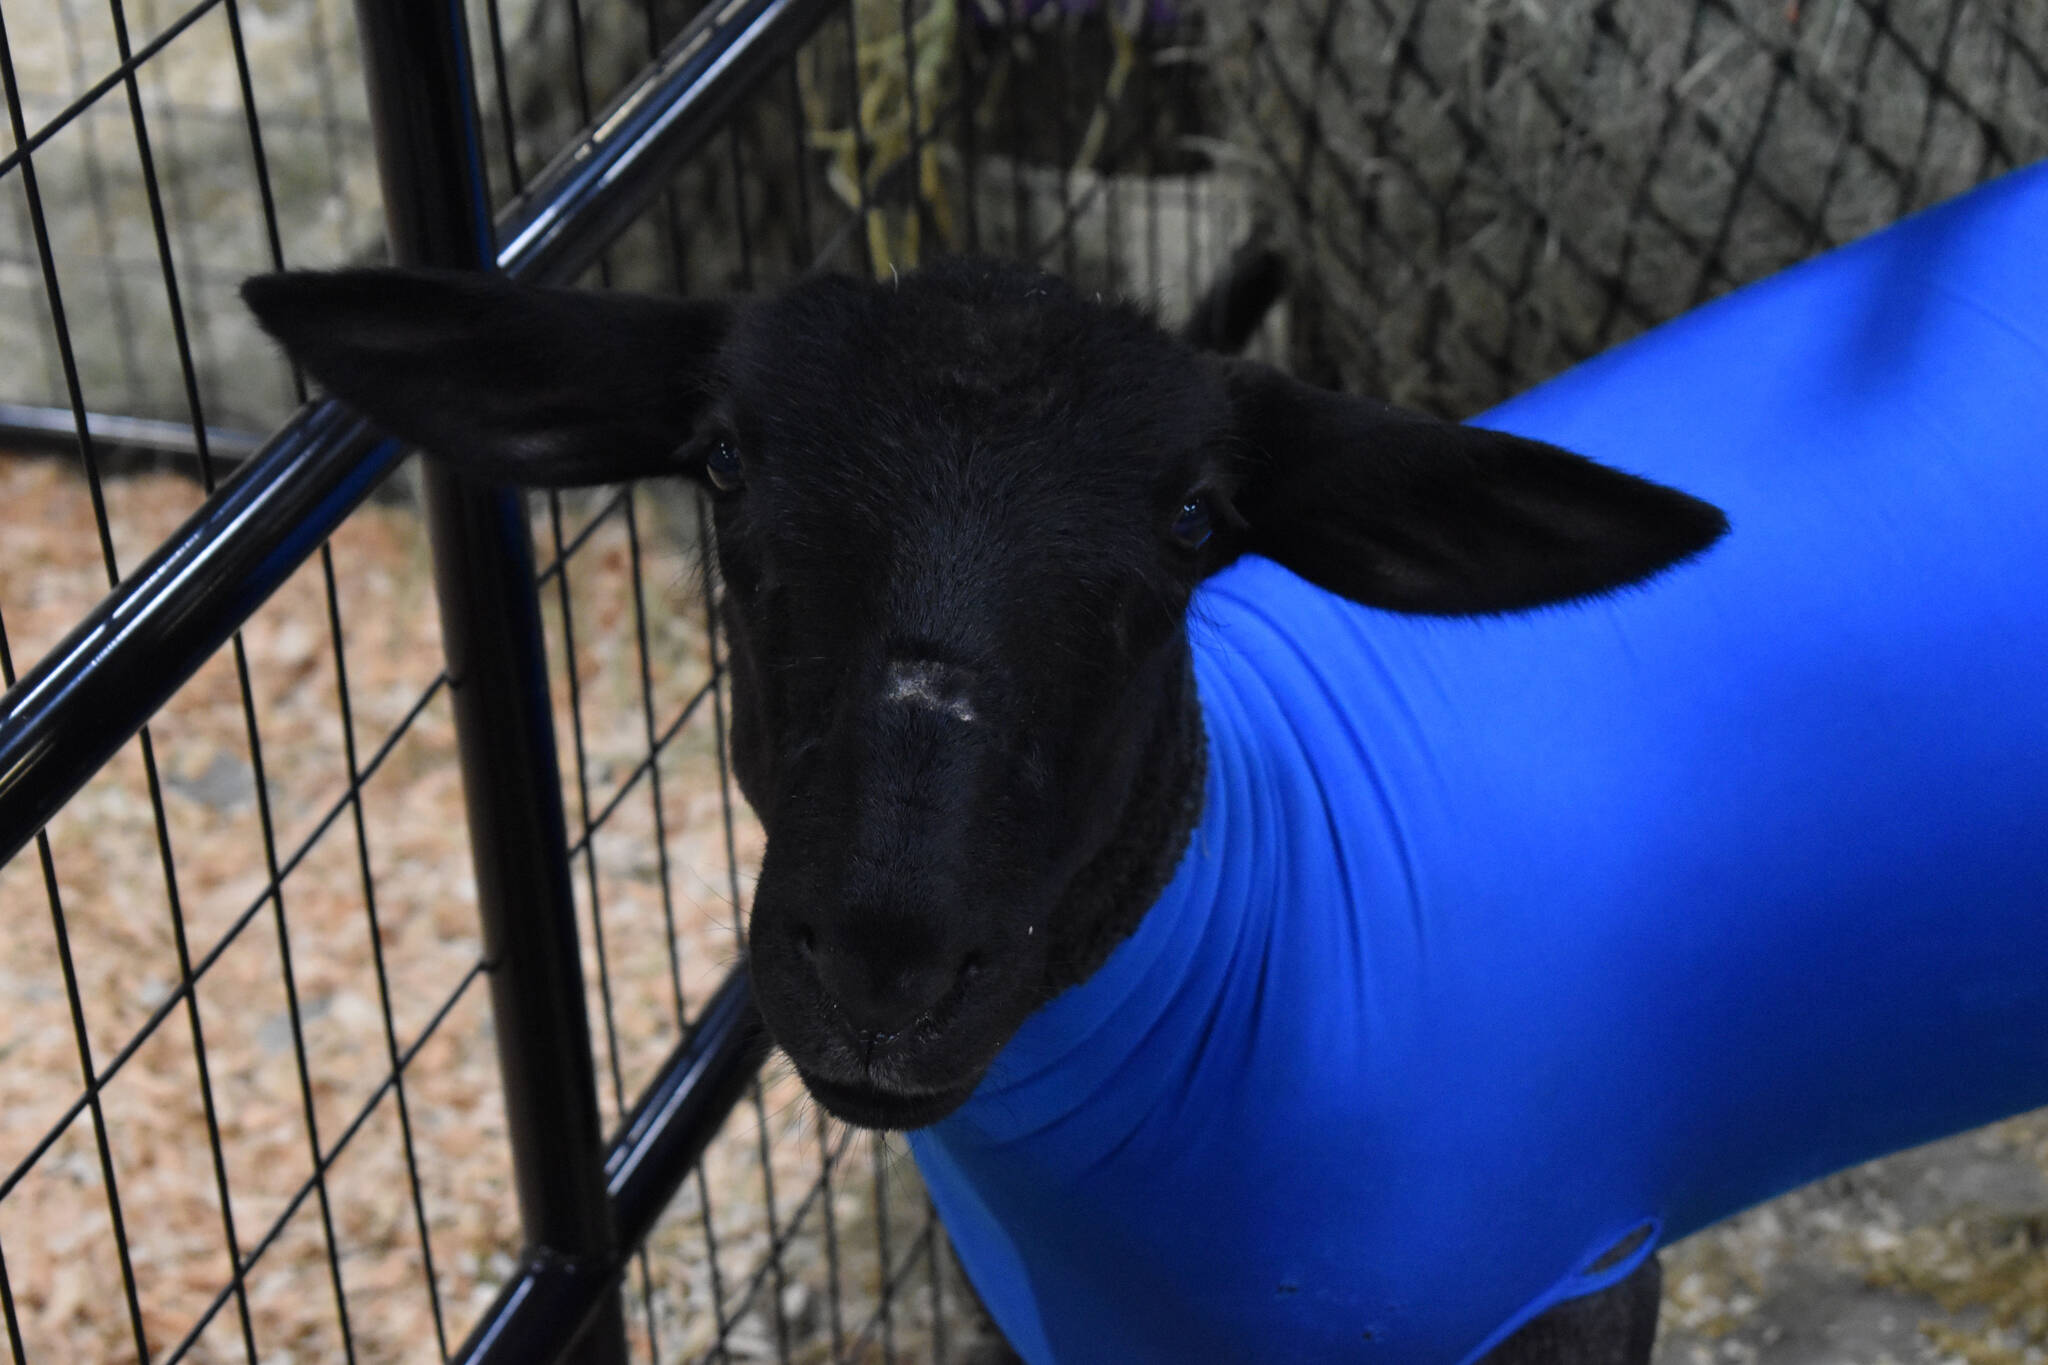 A goat waits to be shown at the 4-H Agriculture Expo in Soldotna, Alaska, on Aug. 5, 2022. (Jake Dye/Peninsula Clarion)